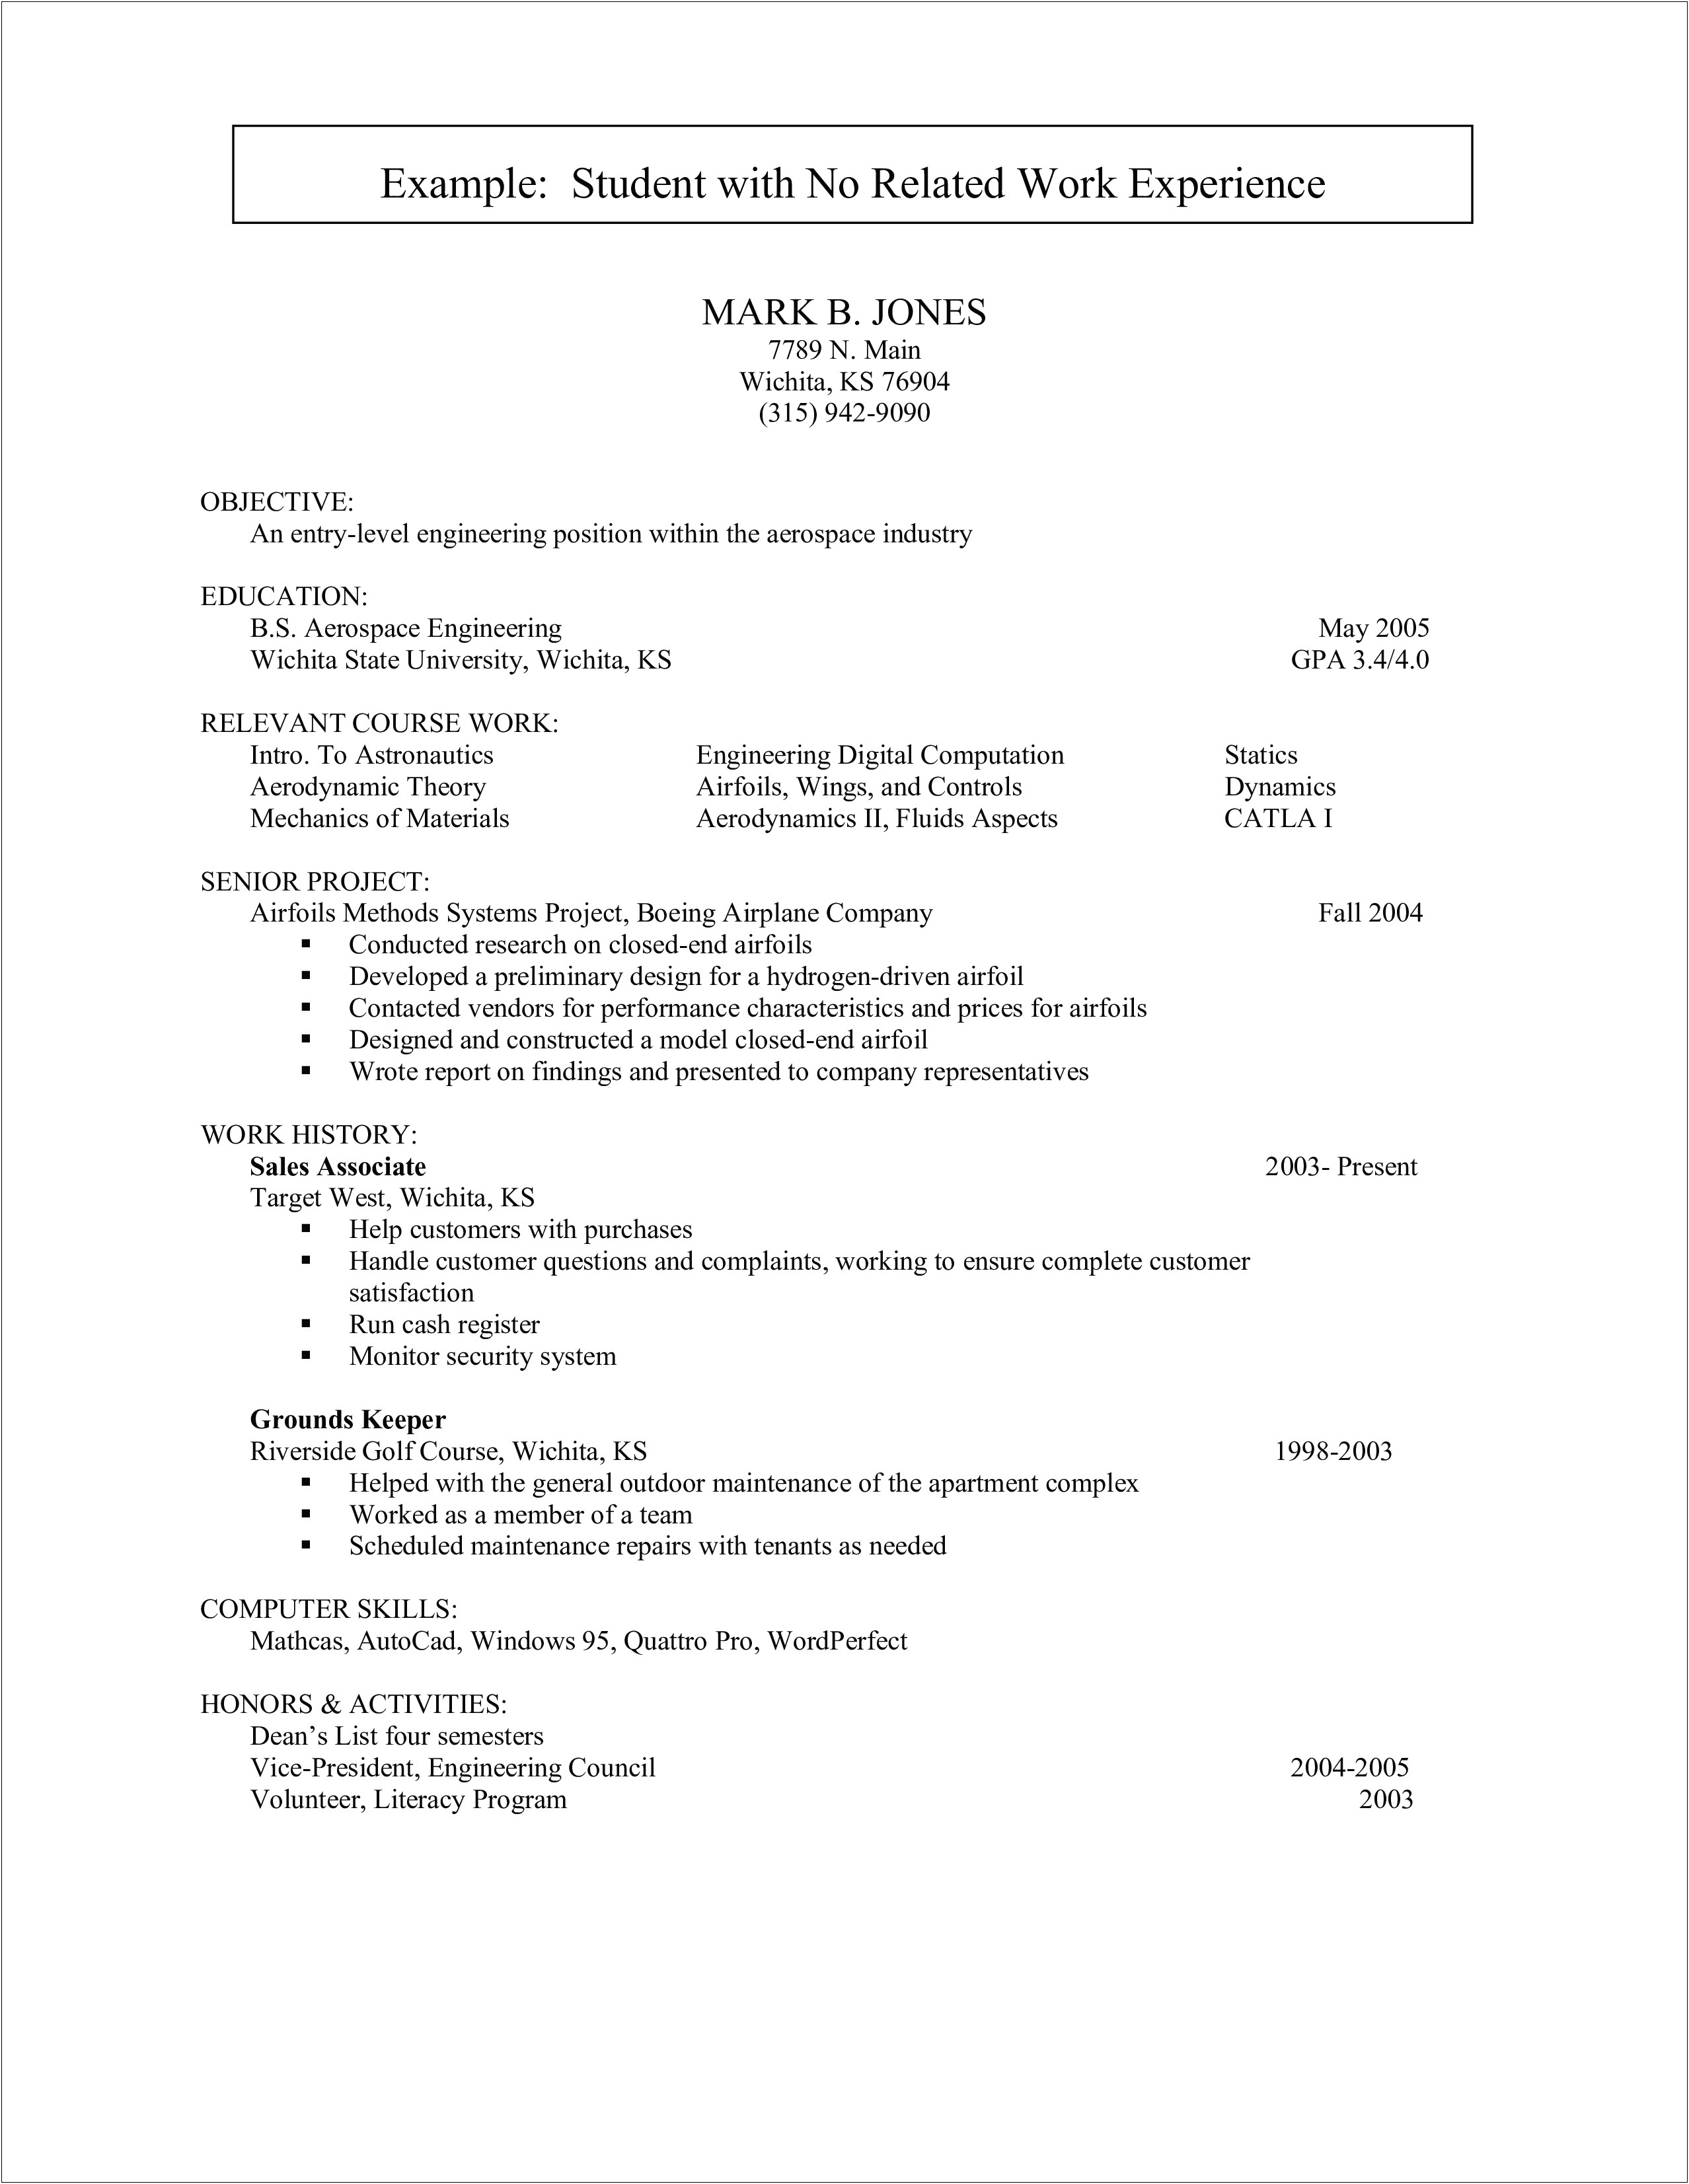 Example Of A Resume Without Job Experience